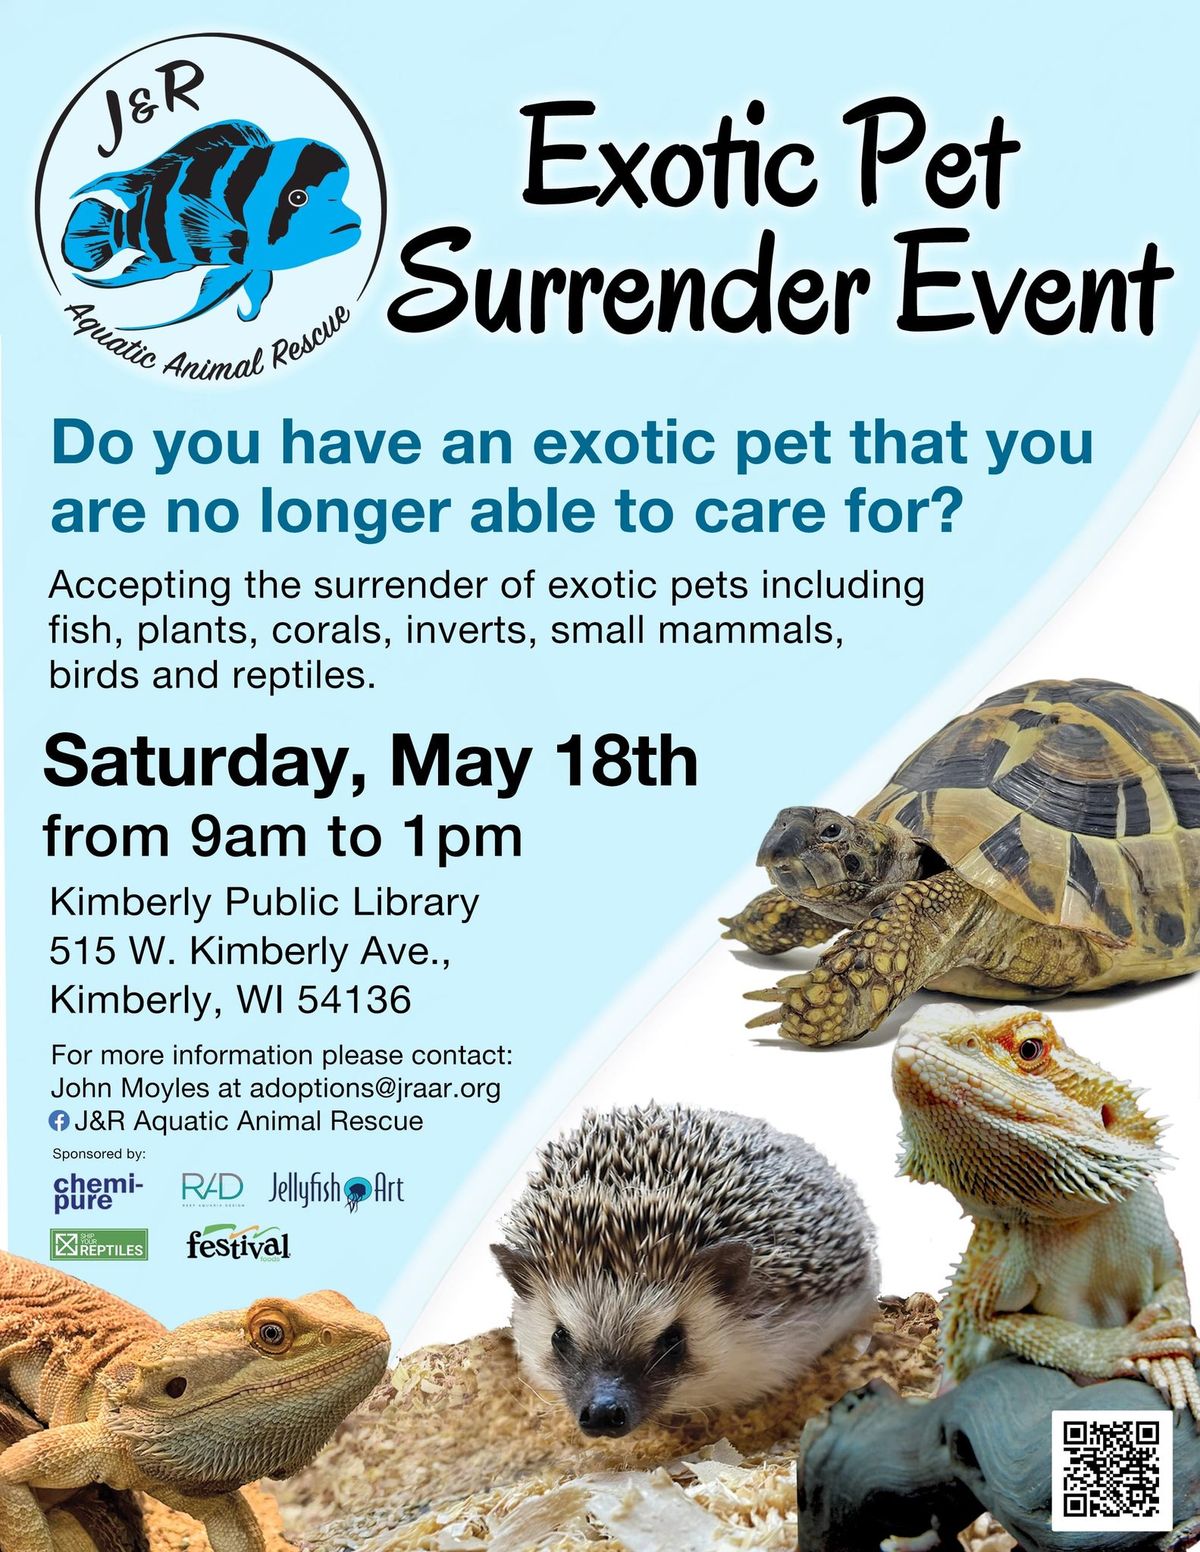 Exotic Pet Surrender Event - Kimberly